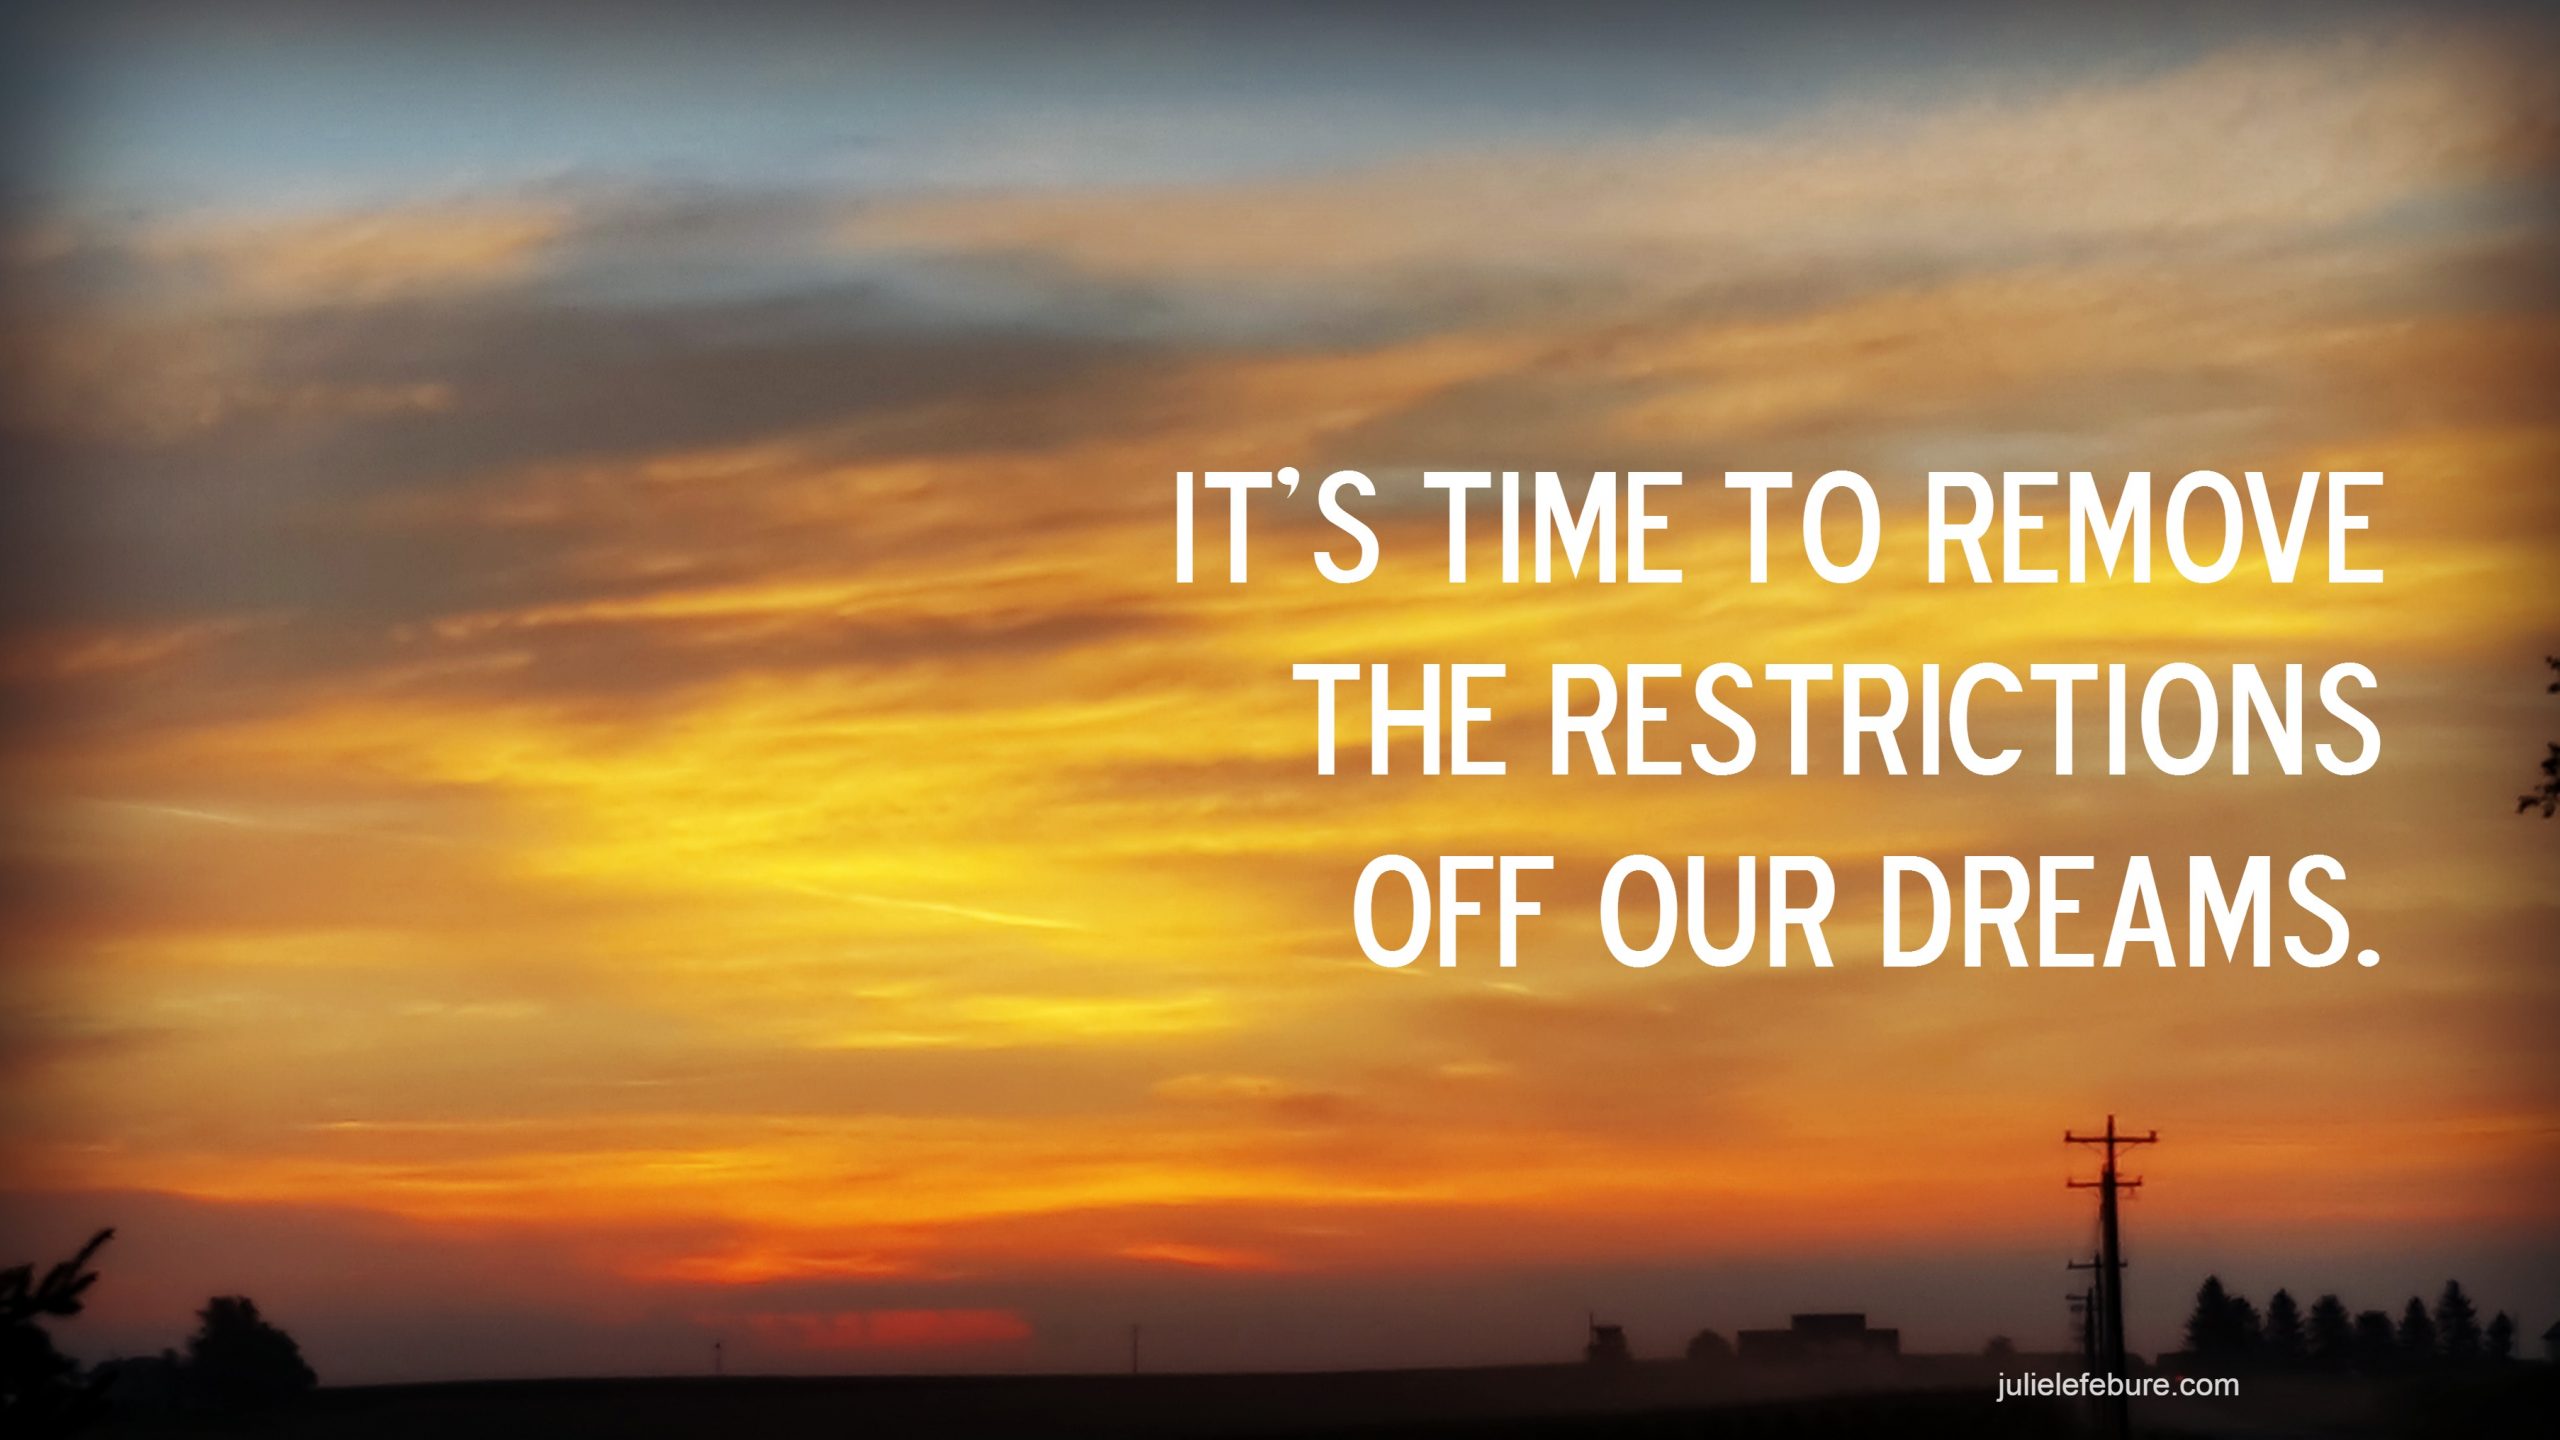 It’s Time To Remove The Restrictions Off Our Dreams